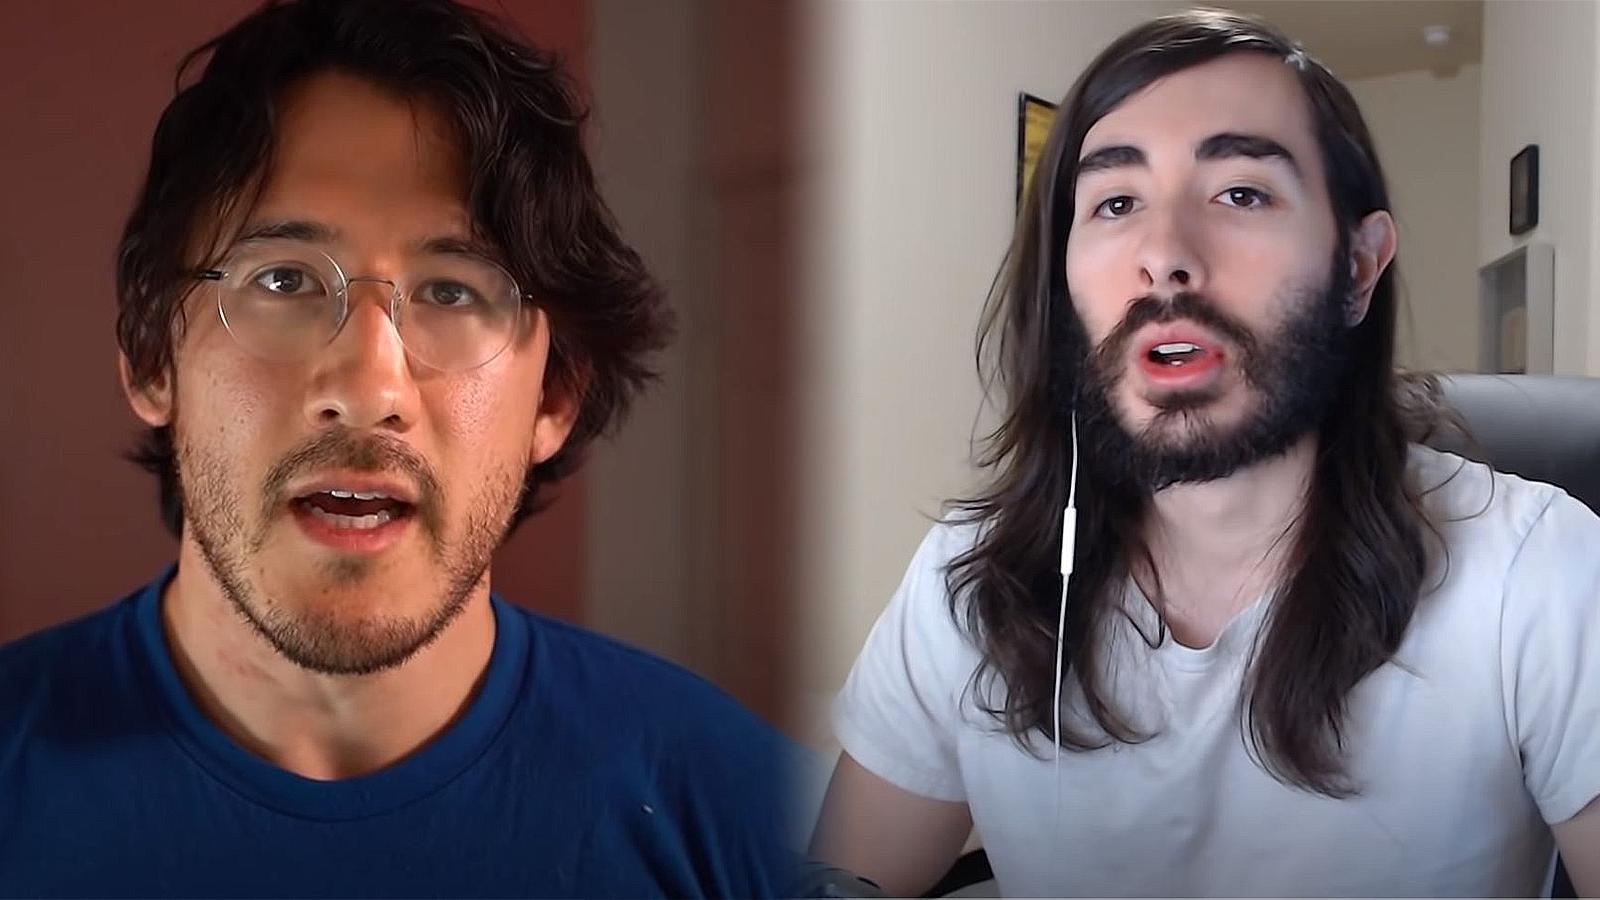 YouTubers Markiplier and Critikal speak to their audiences